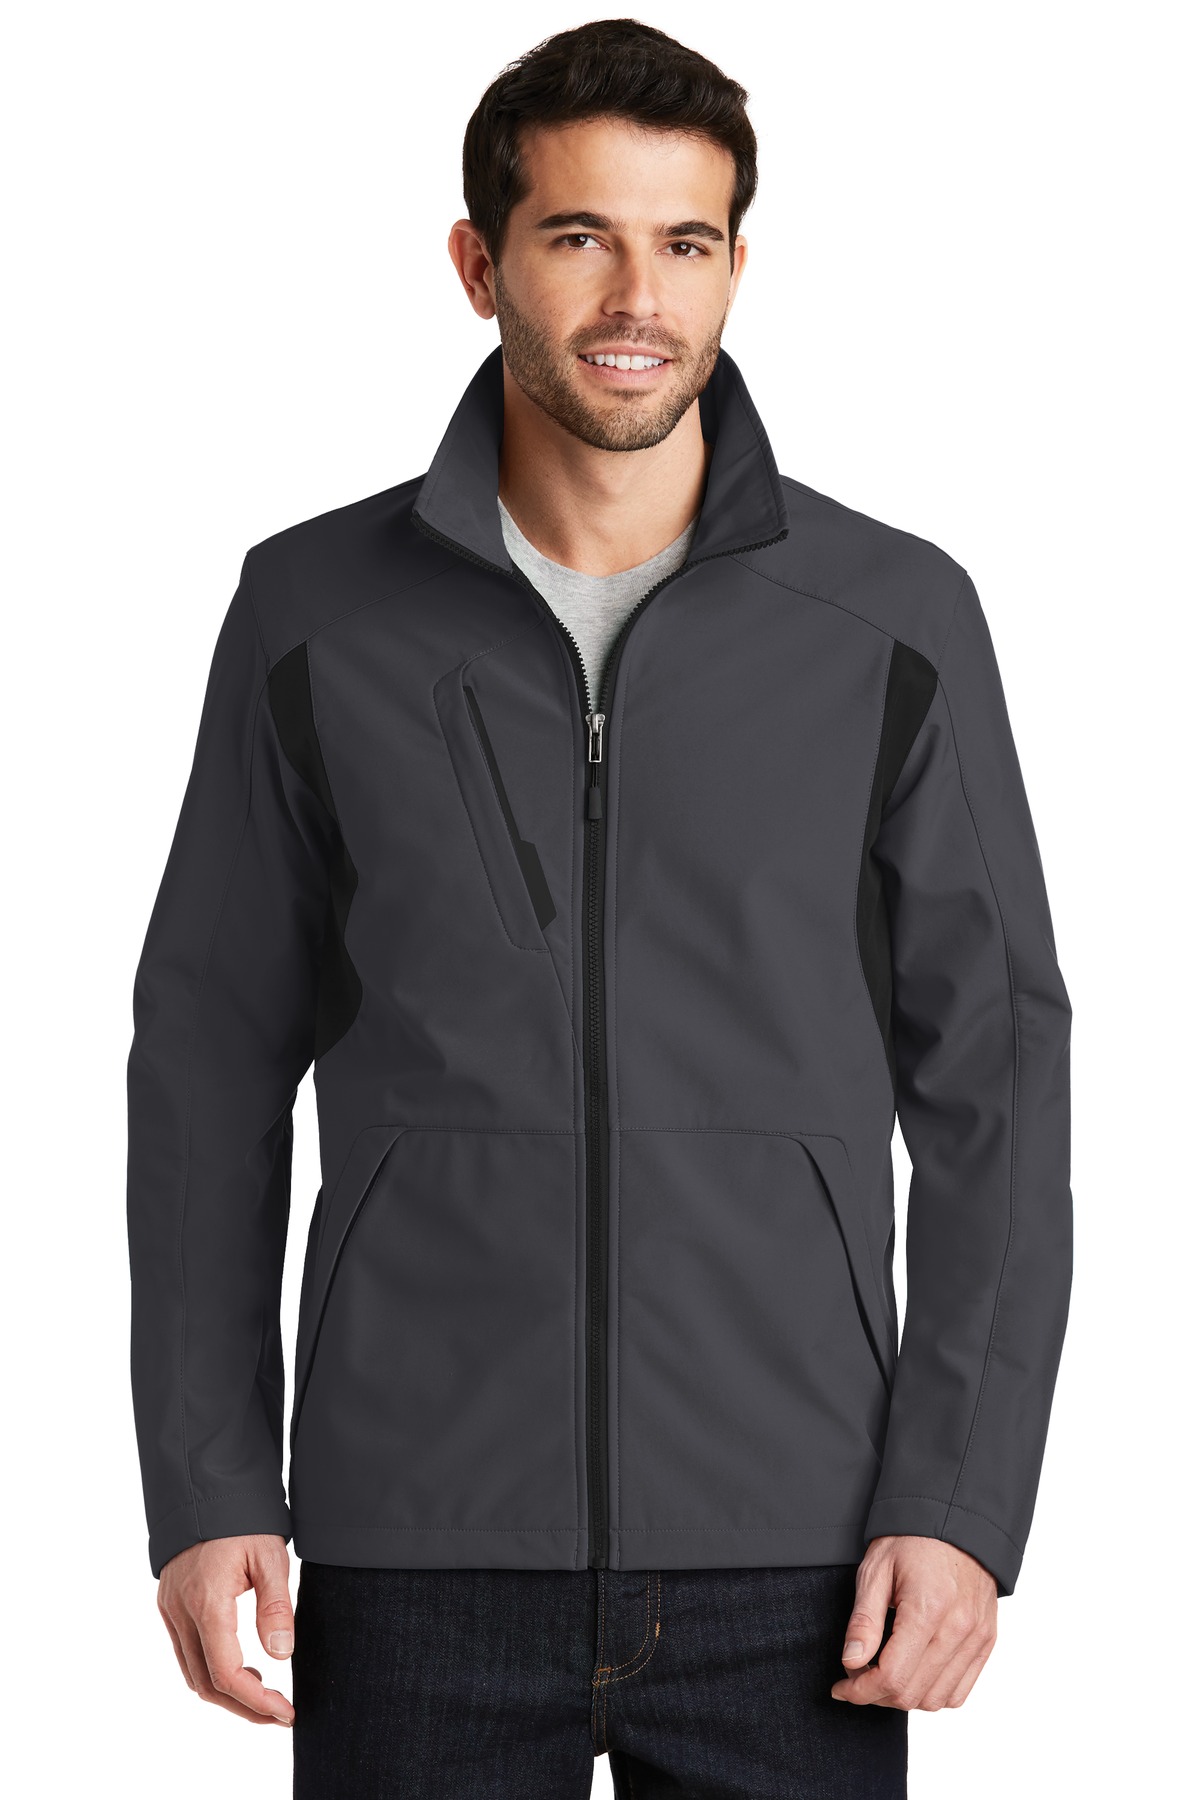 Port Authority Outerwear for Corporate & Hospitality ® Back-Block Soft Shell Jacket.-Port Authority